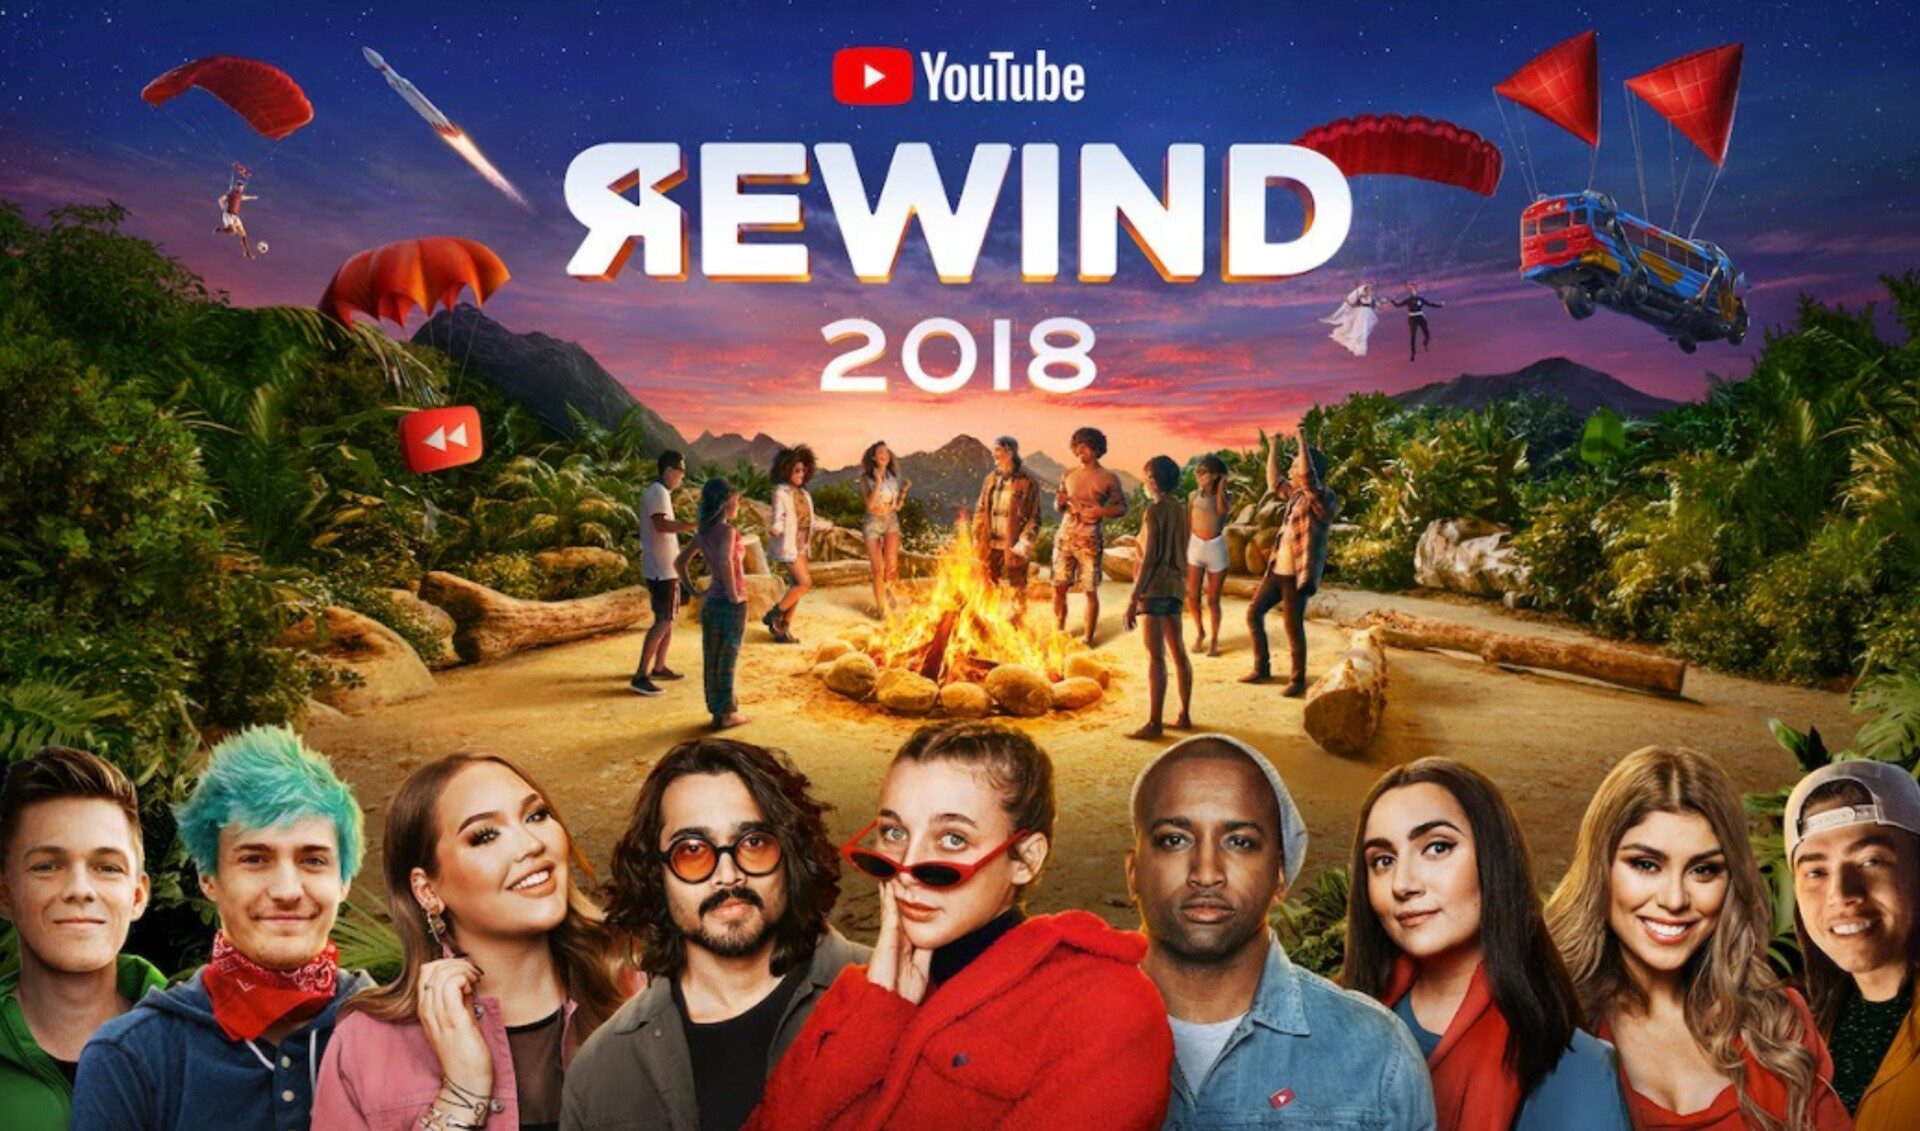 YouTube To Stop Making Year-End ‘Rewind’ Videos (Exclusive)